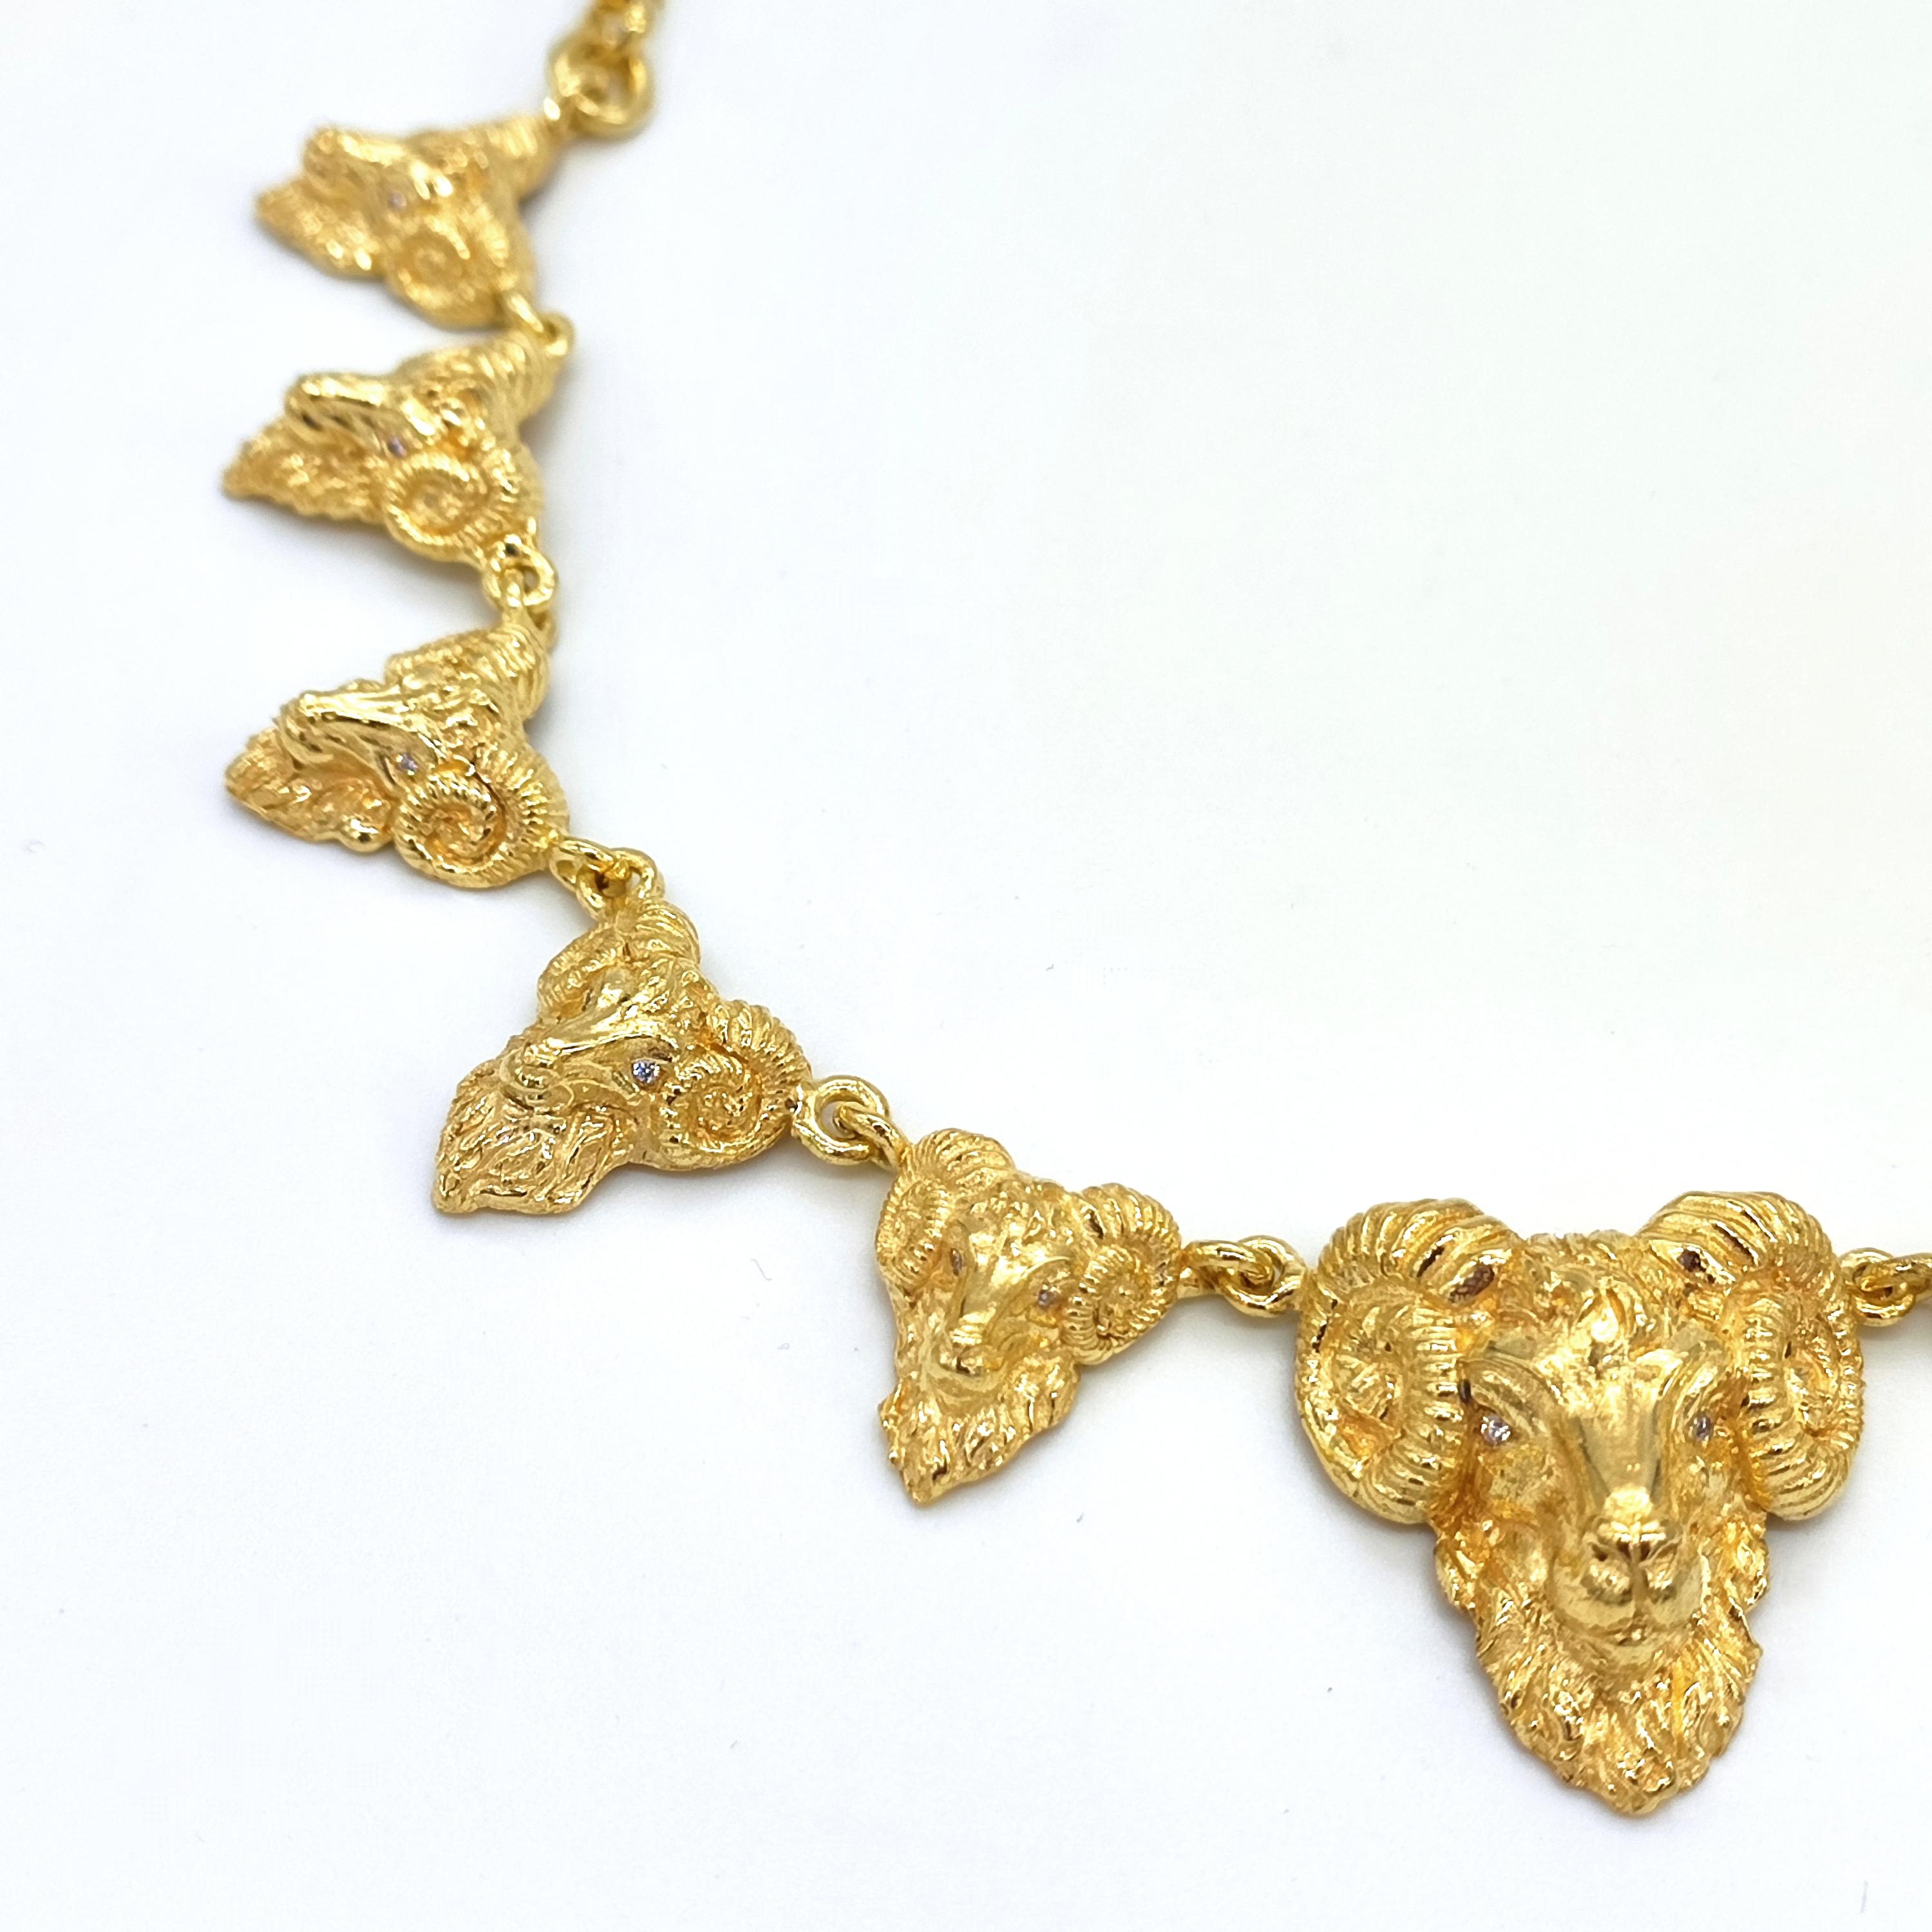 Brilliant Cut Aries Head 14 Karat Solid Gold Necklace with Diamonds For Sale